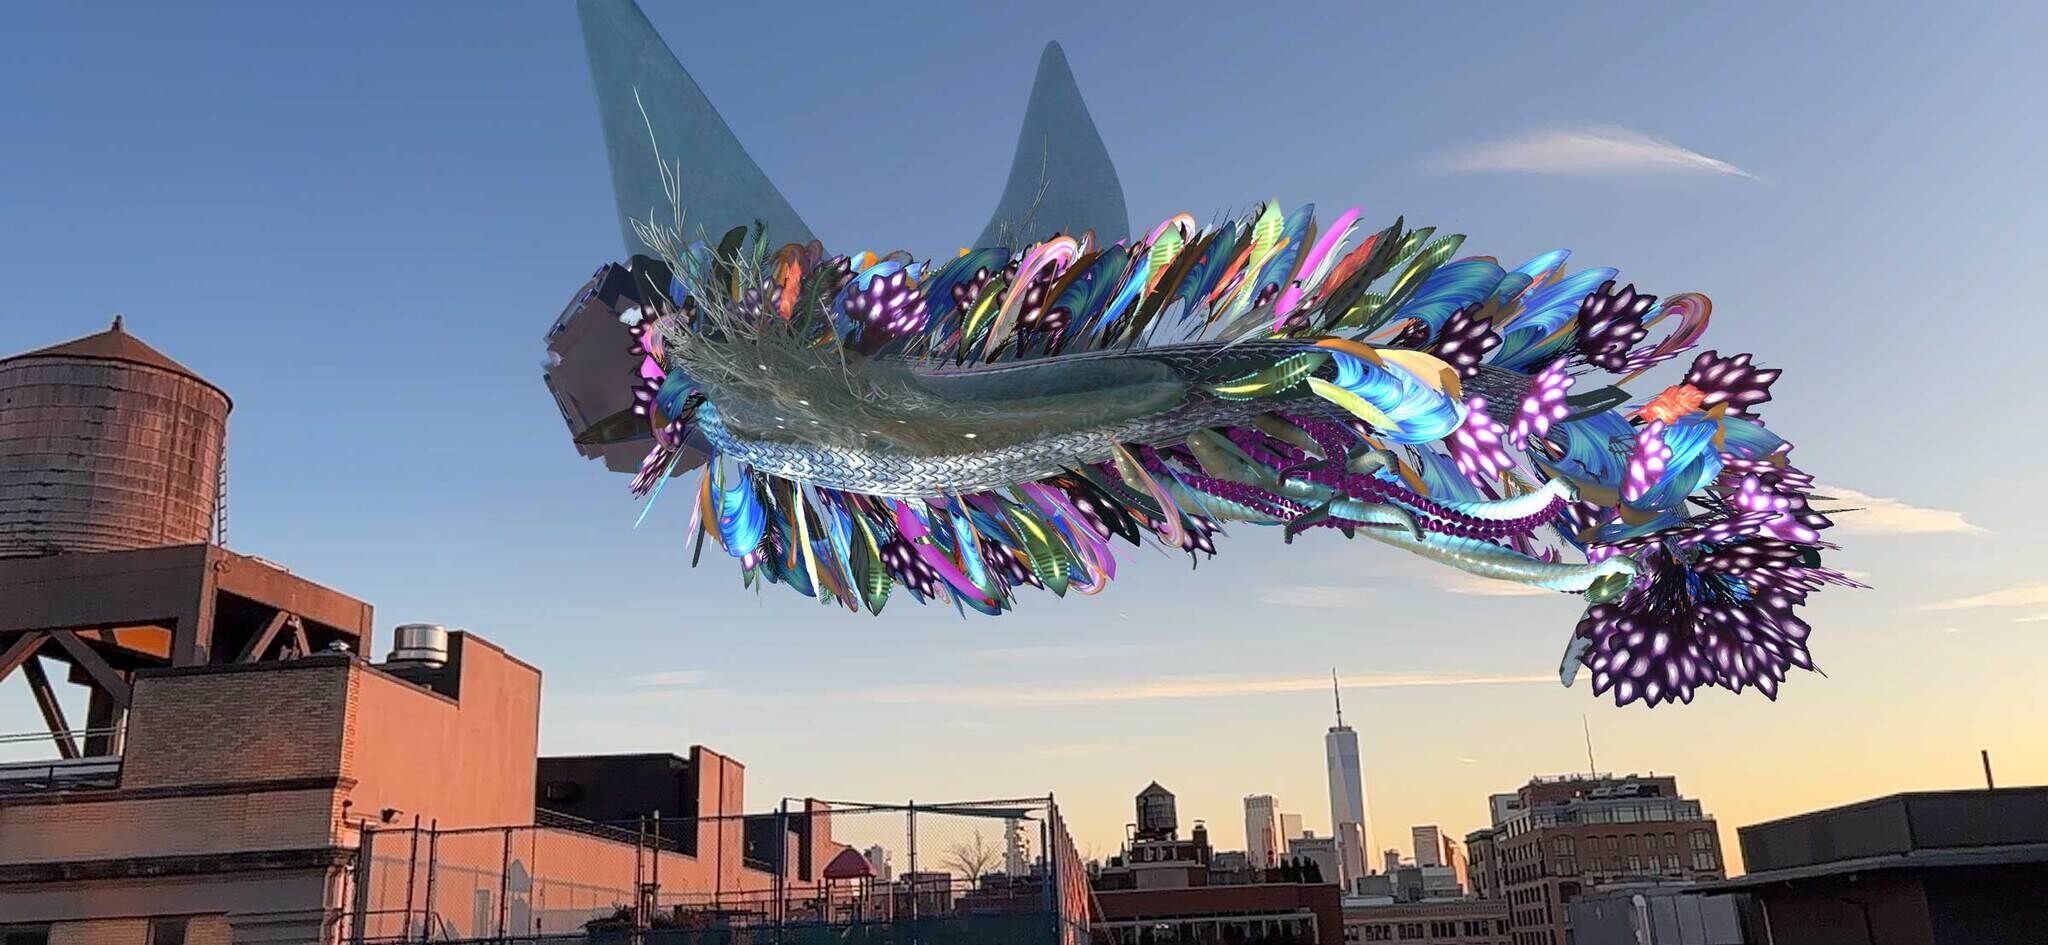 A vibrant, multicolored digital creature with feather-like textures flies above an urban rooftop skyline at dusk.